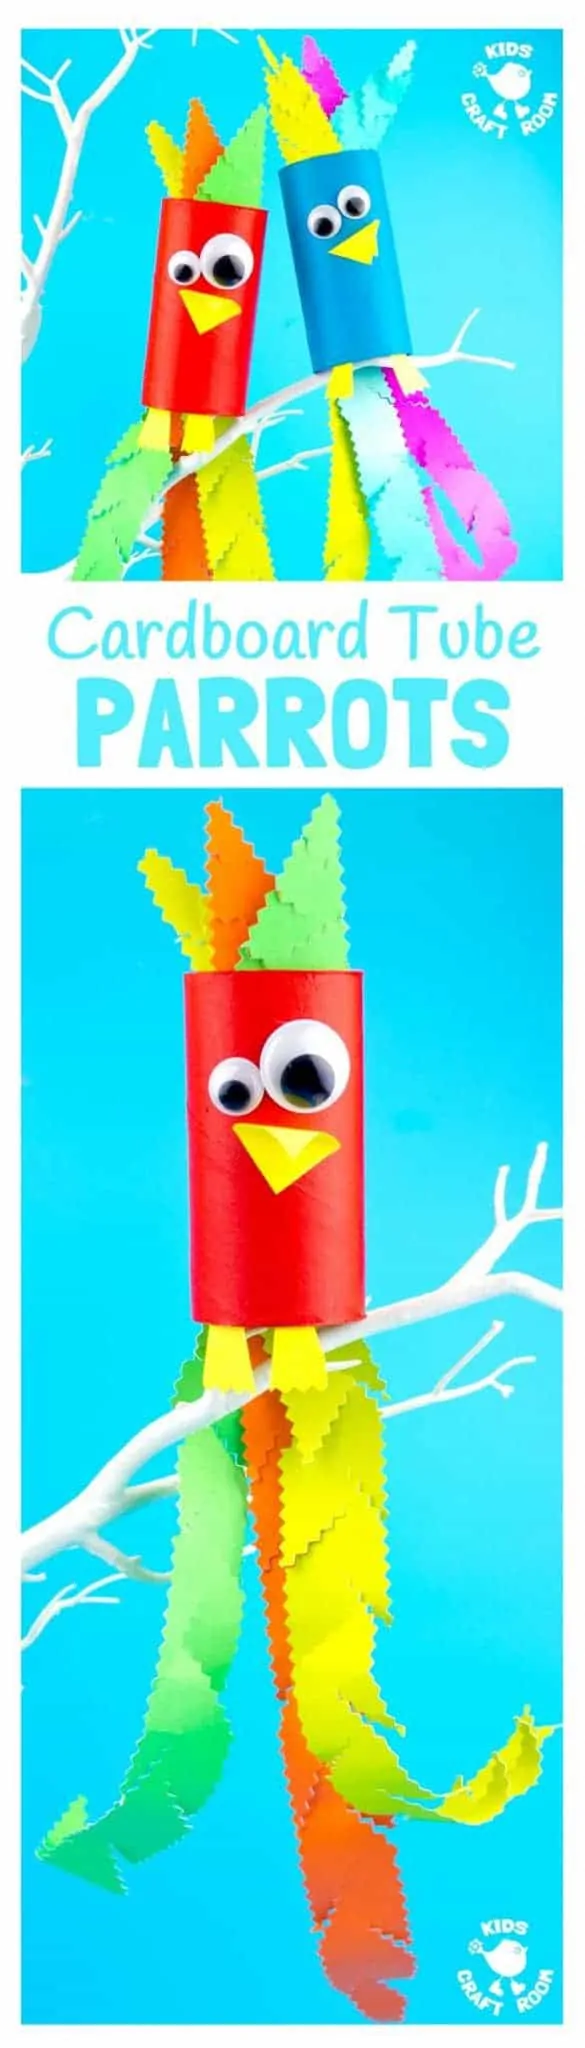 CARDBOARD TUBE PARROT CRAFT - Squawk! What a fun jungle craft for kids.  A colourful tropical bird craft that gives lots of fine motor scissor skills practice. #parrot #parrots #parrotcrafts #jungle #junglecrafts #jungleanimals #kidscrafts #cardboardtubes #tprolls #cardboardtubecrafts #birdcrafts #animalcrafts #craftsforkids #kidscraftroom